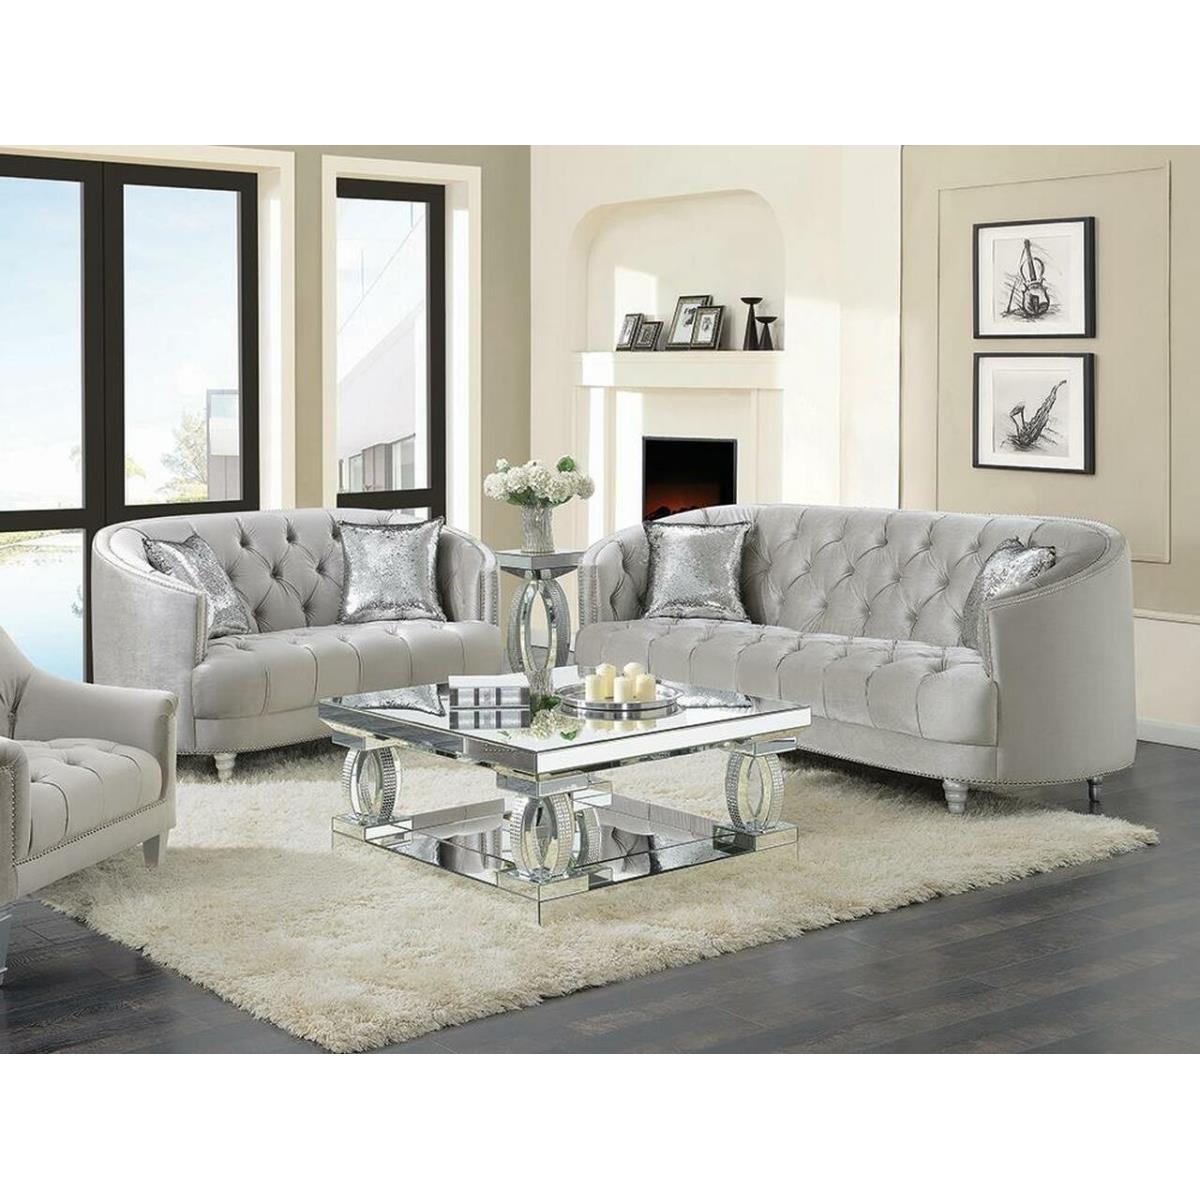 Picture of Coaster Furniture 508461-S2 Avonlea Tufted Living Room Set, Grey - 2 Piece